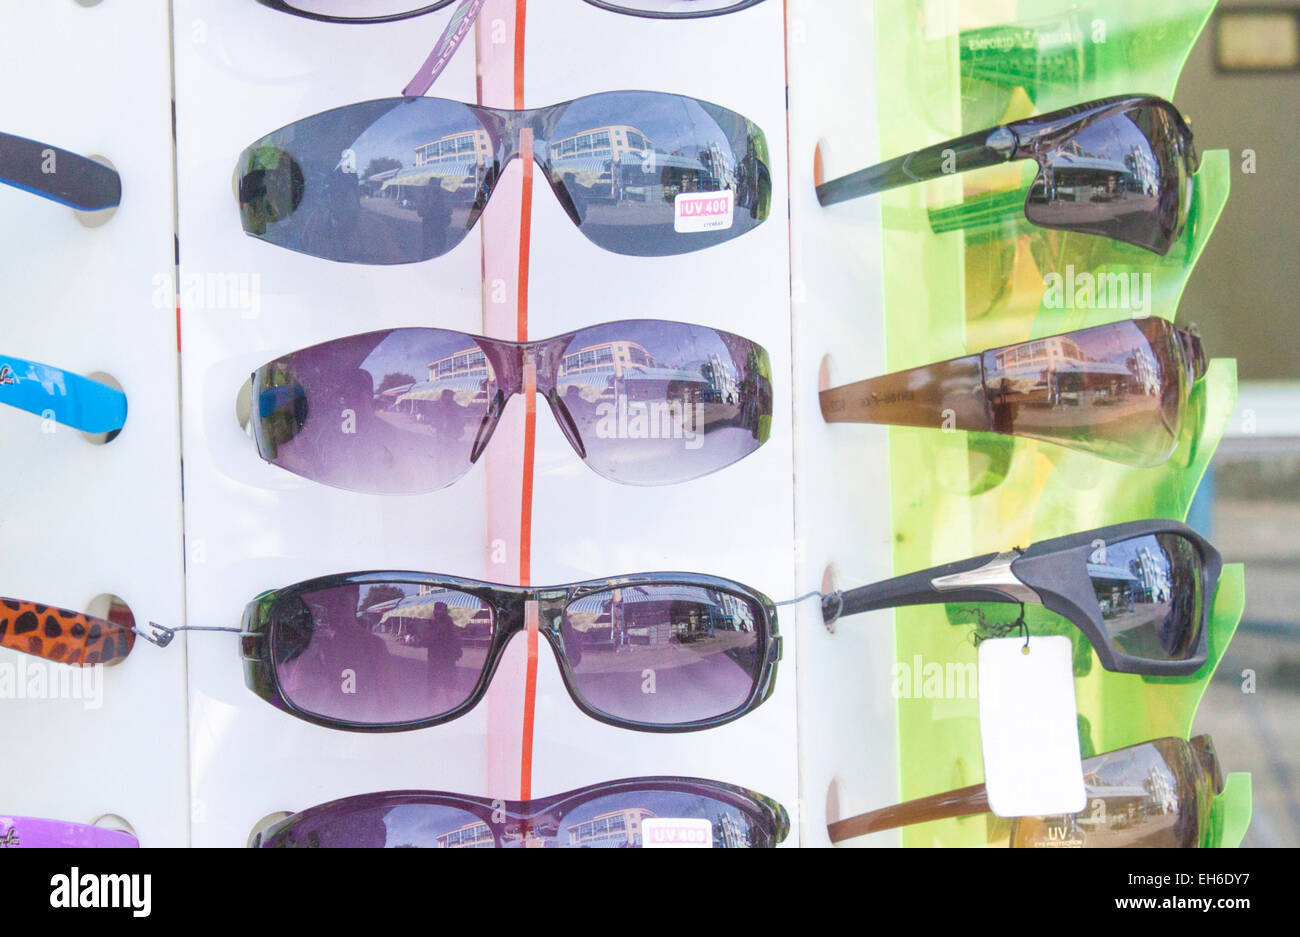 A lot of sunglass, at a market Stock Photo